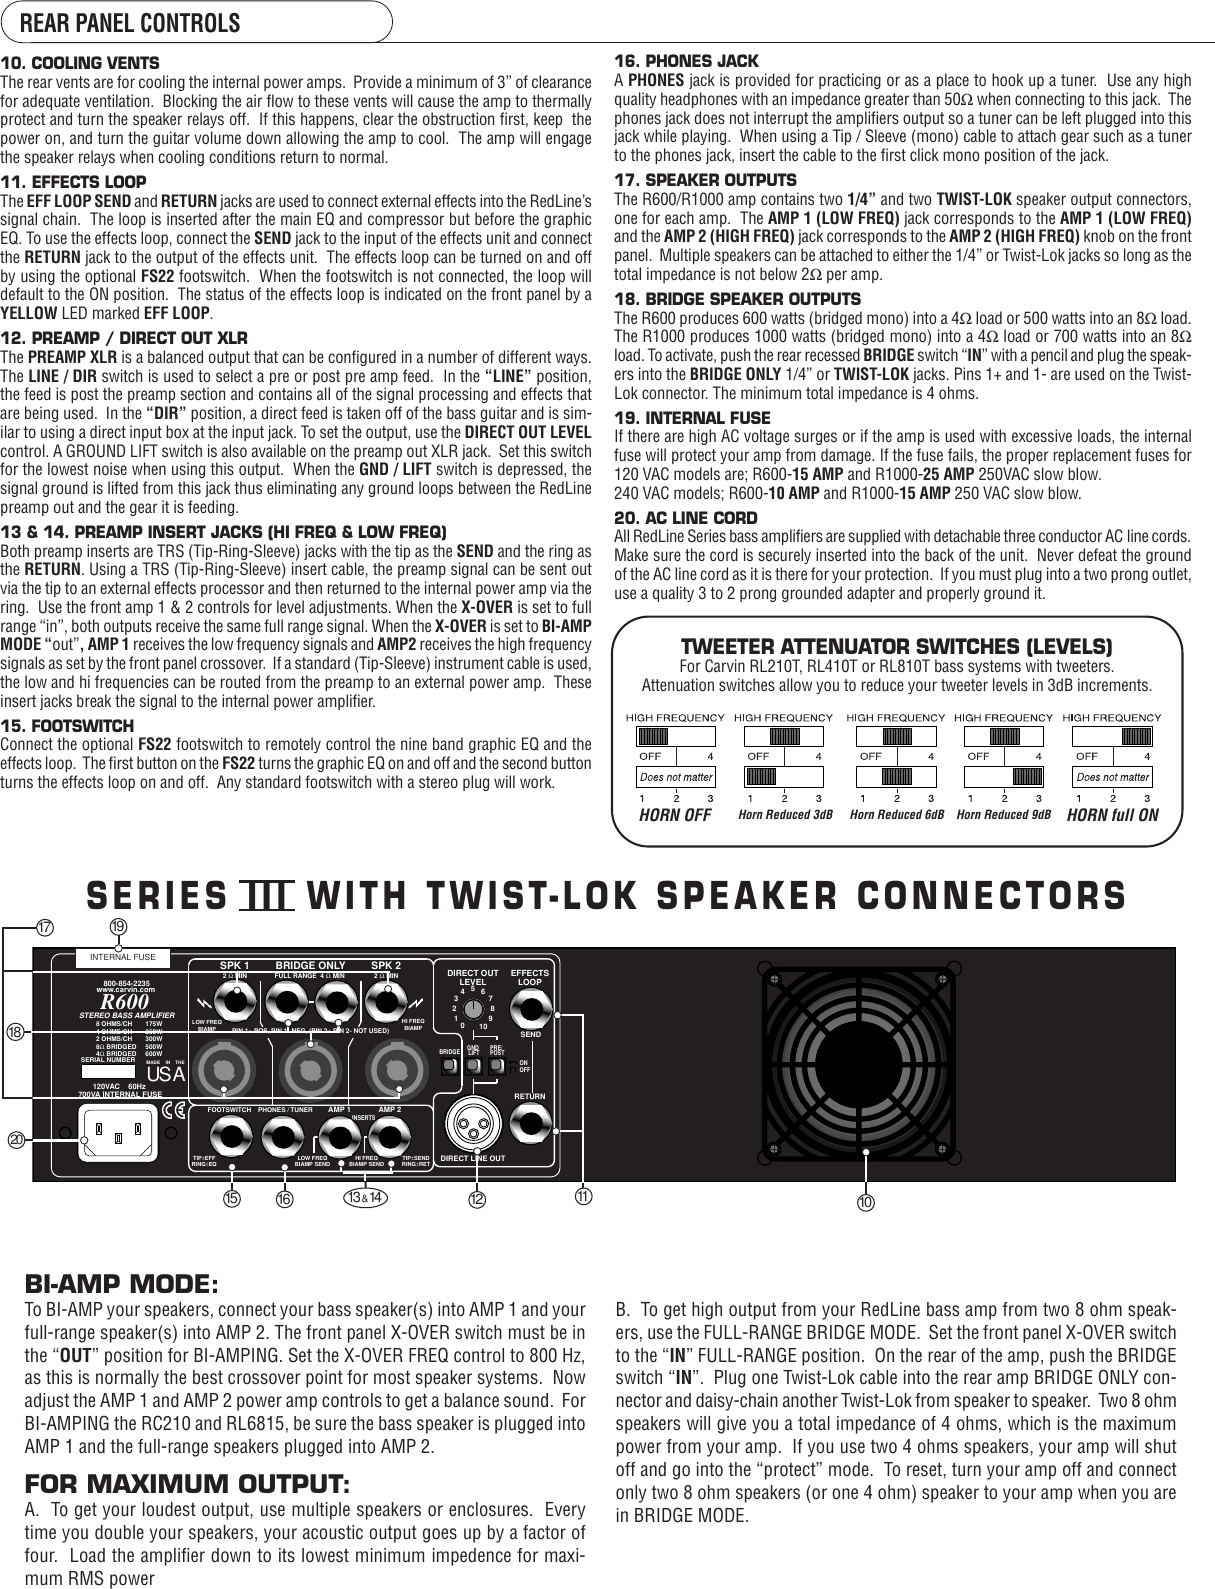 Page 3 of 4 - Carvin Carvin-R600-Series-Iii-Owners-Manual R600_R1000-08/01-web.qx